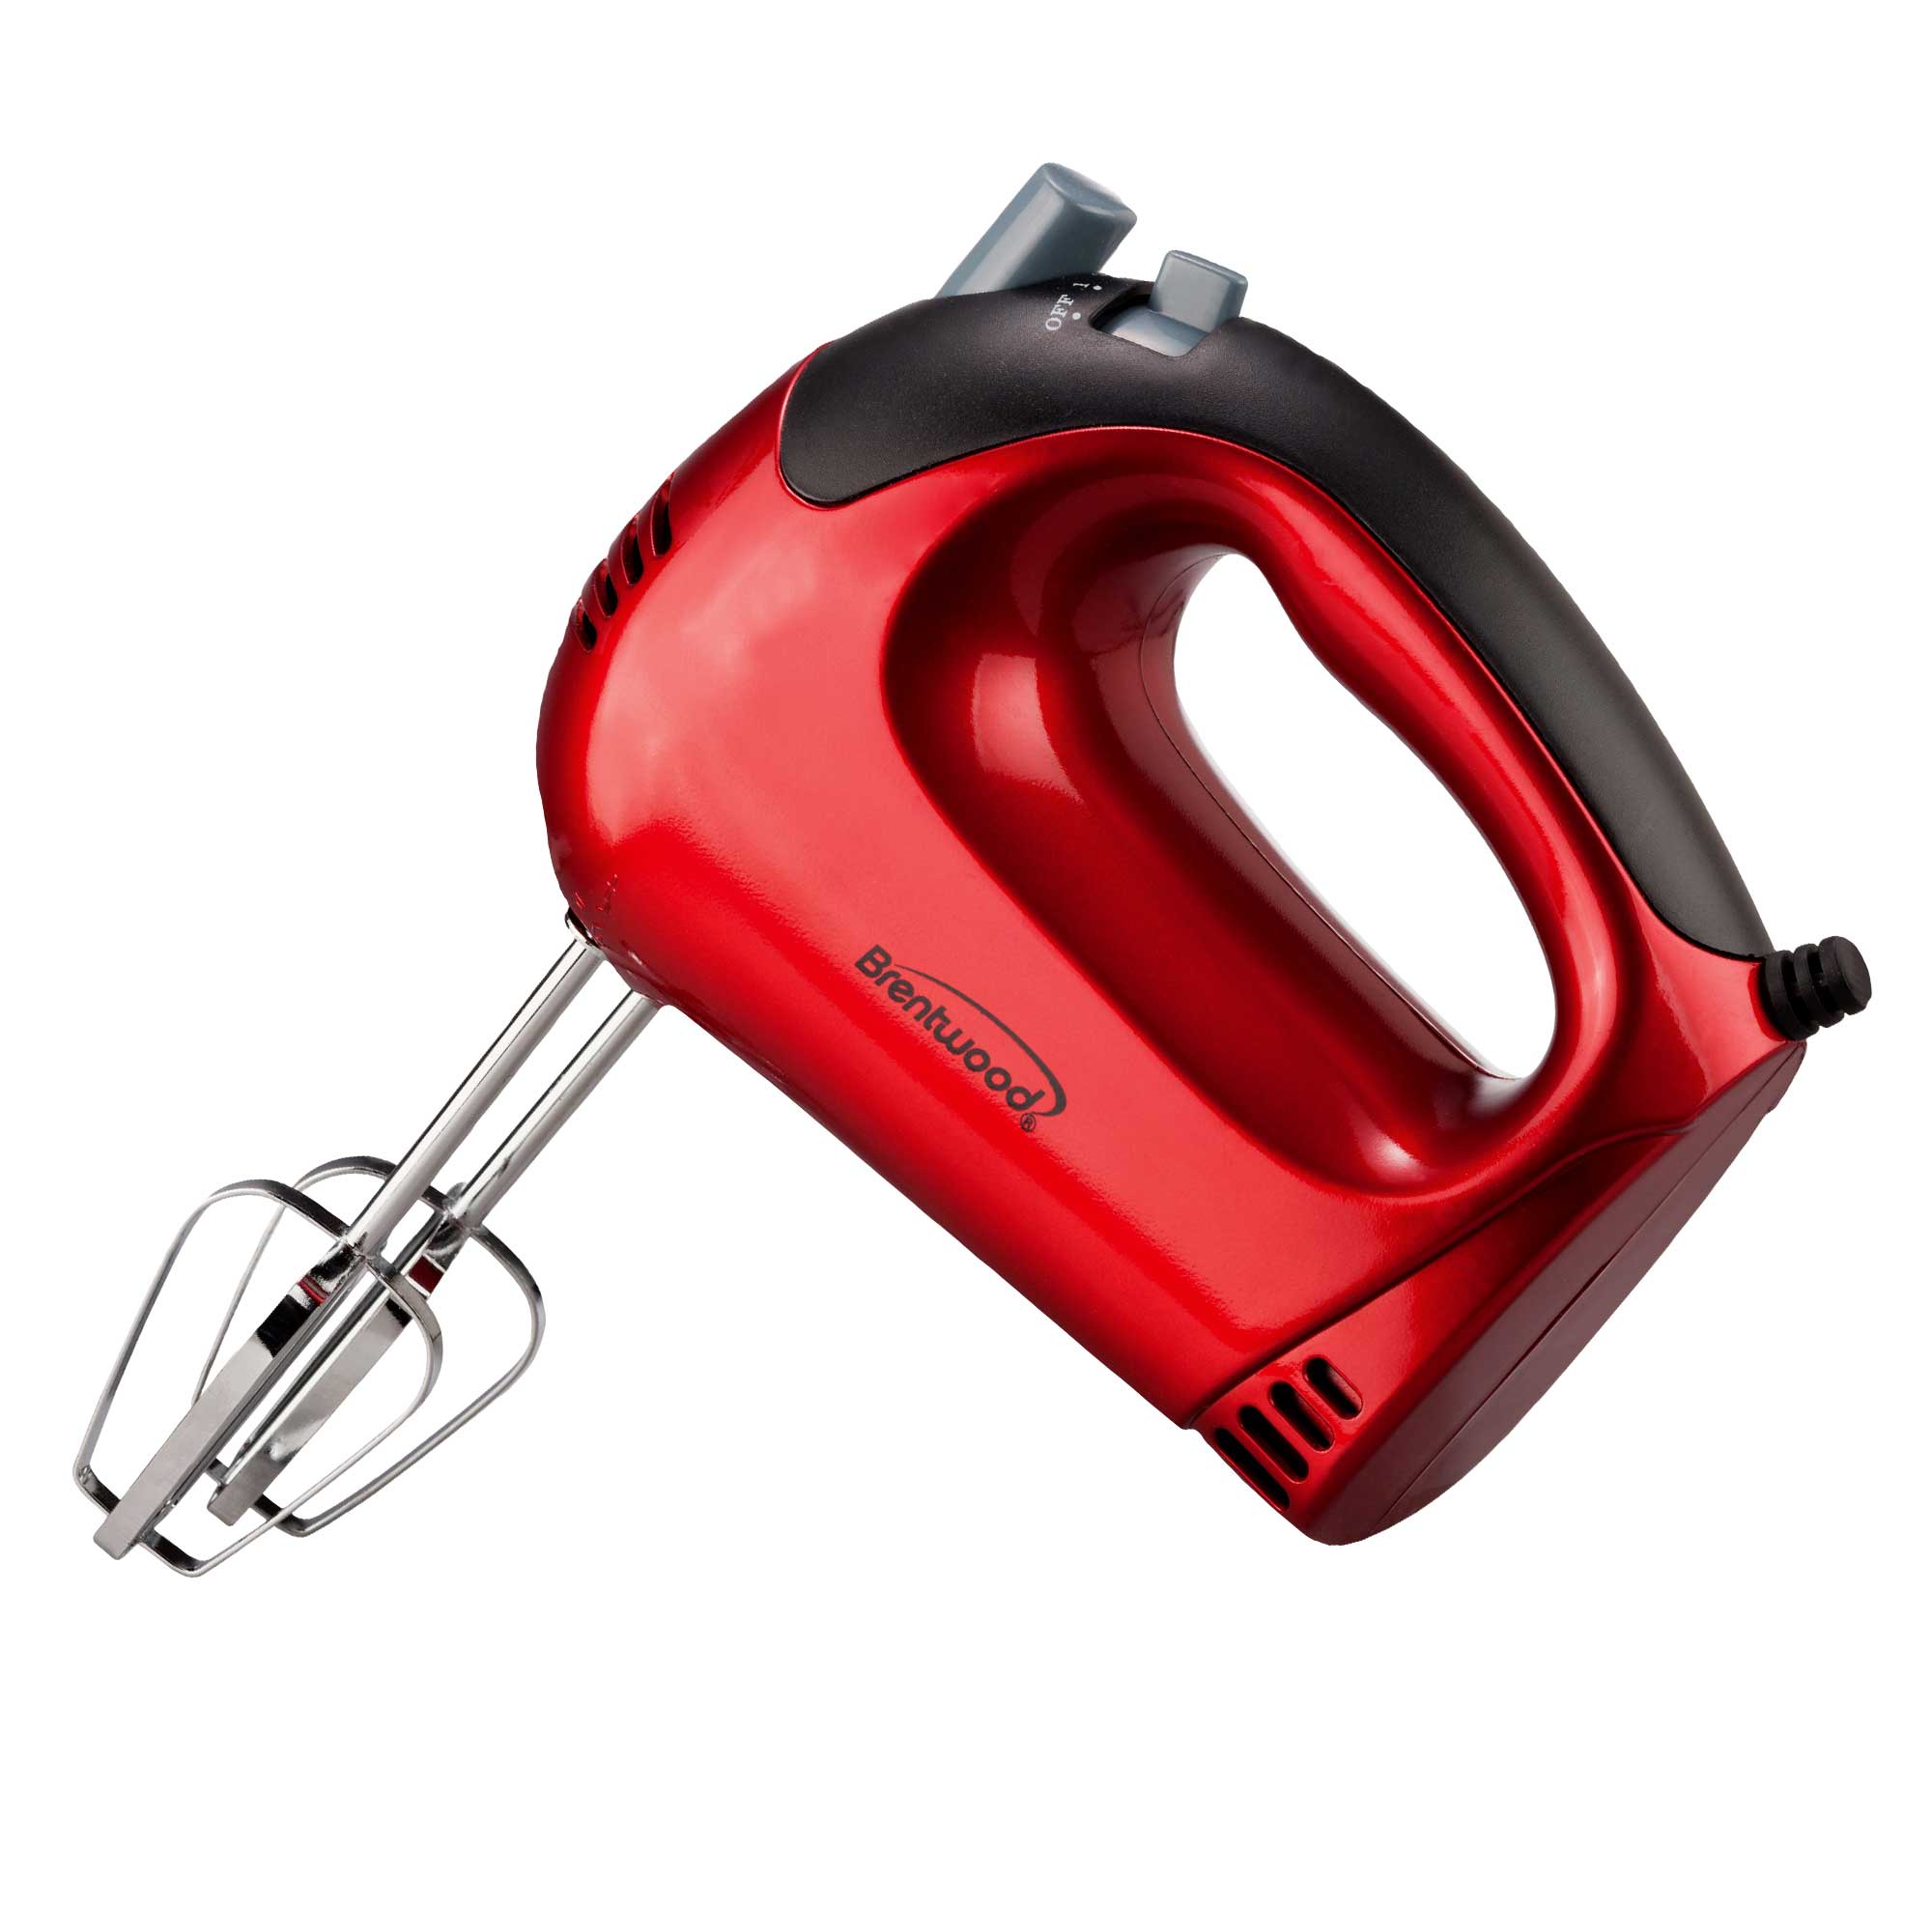 Brentwood HM-46 Lightweight 5-Speed Electric Hand Mixer, Red